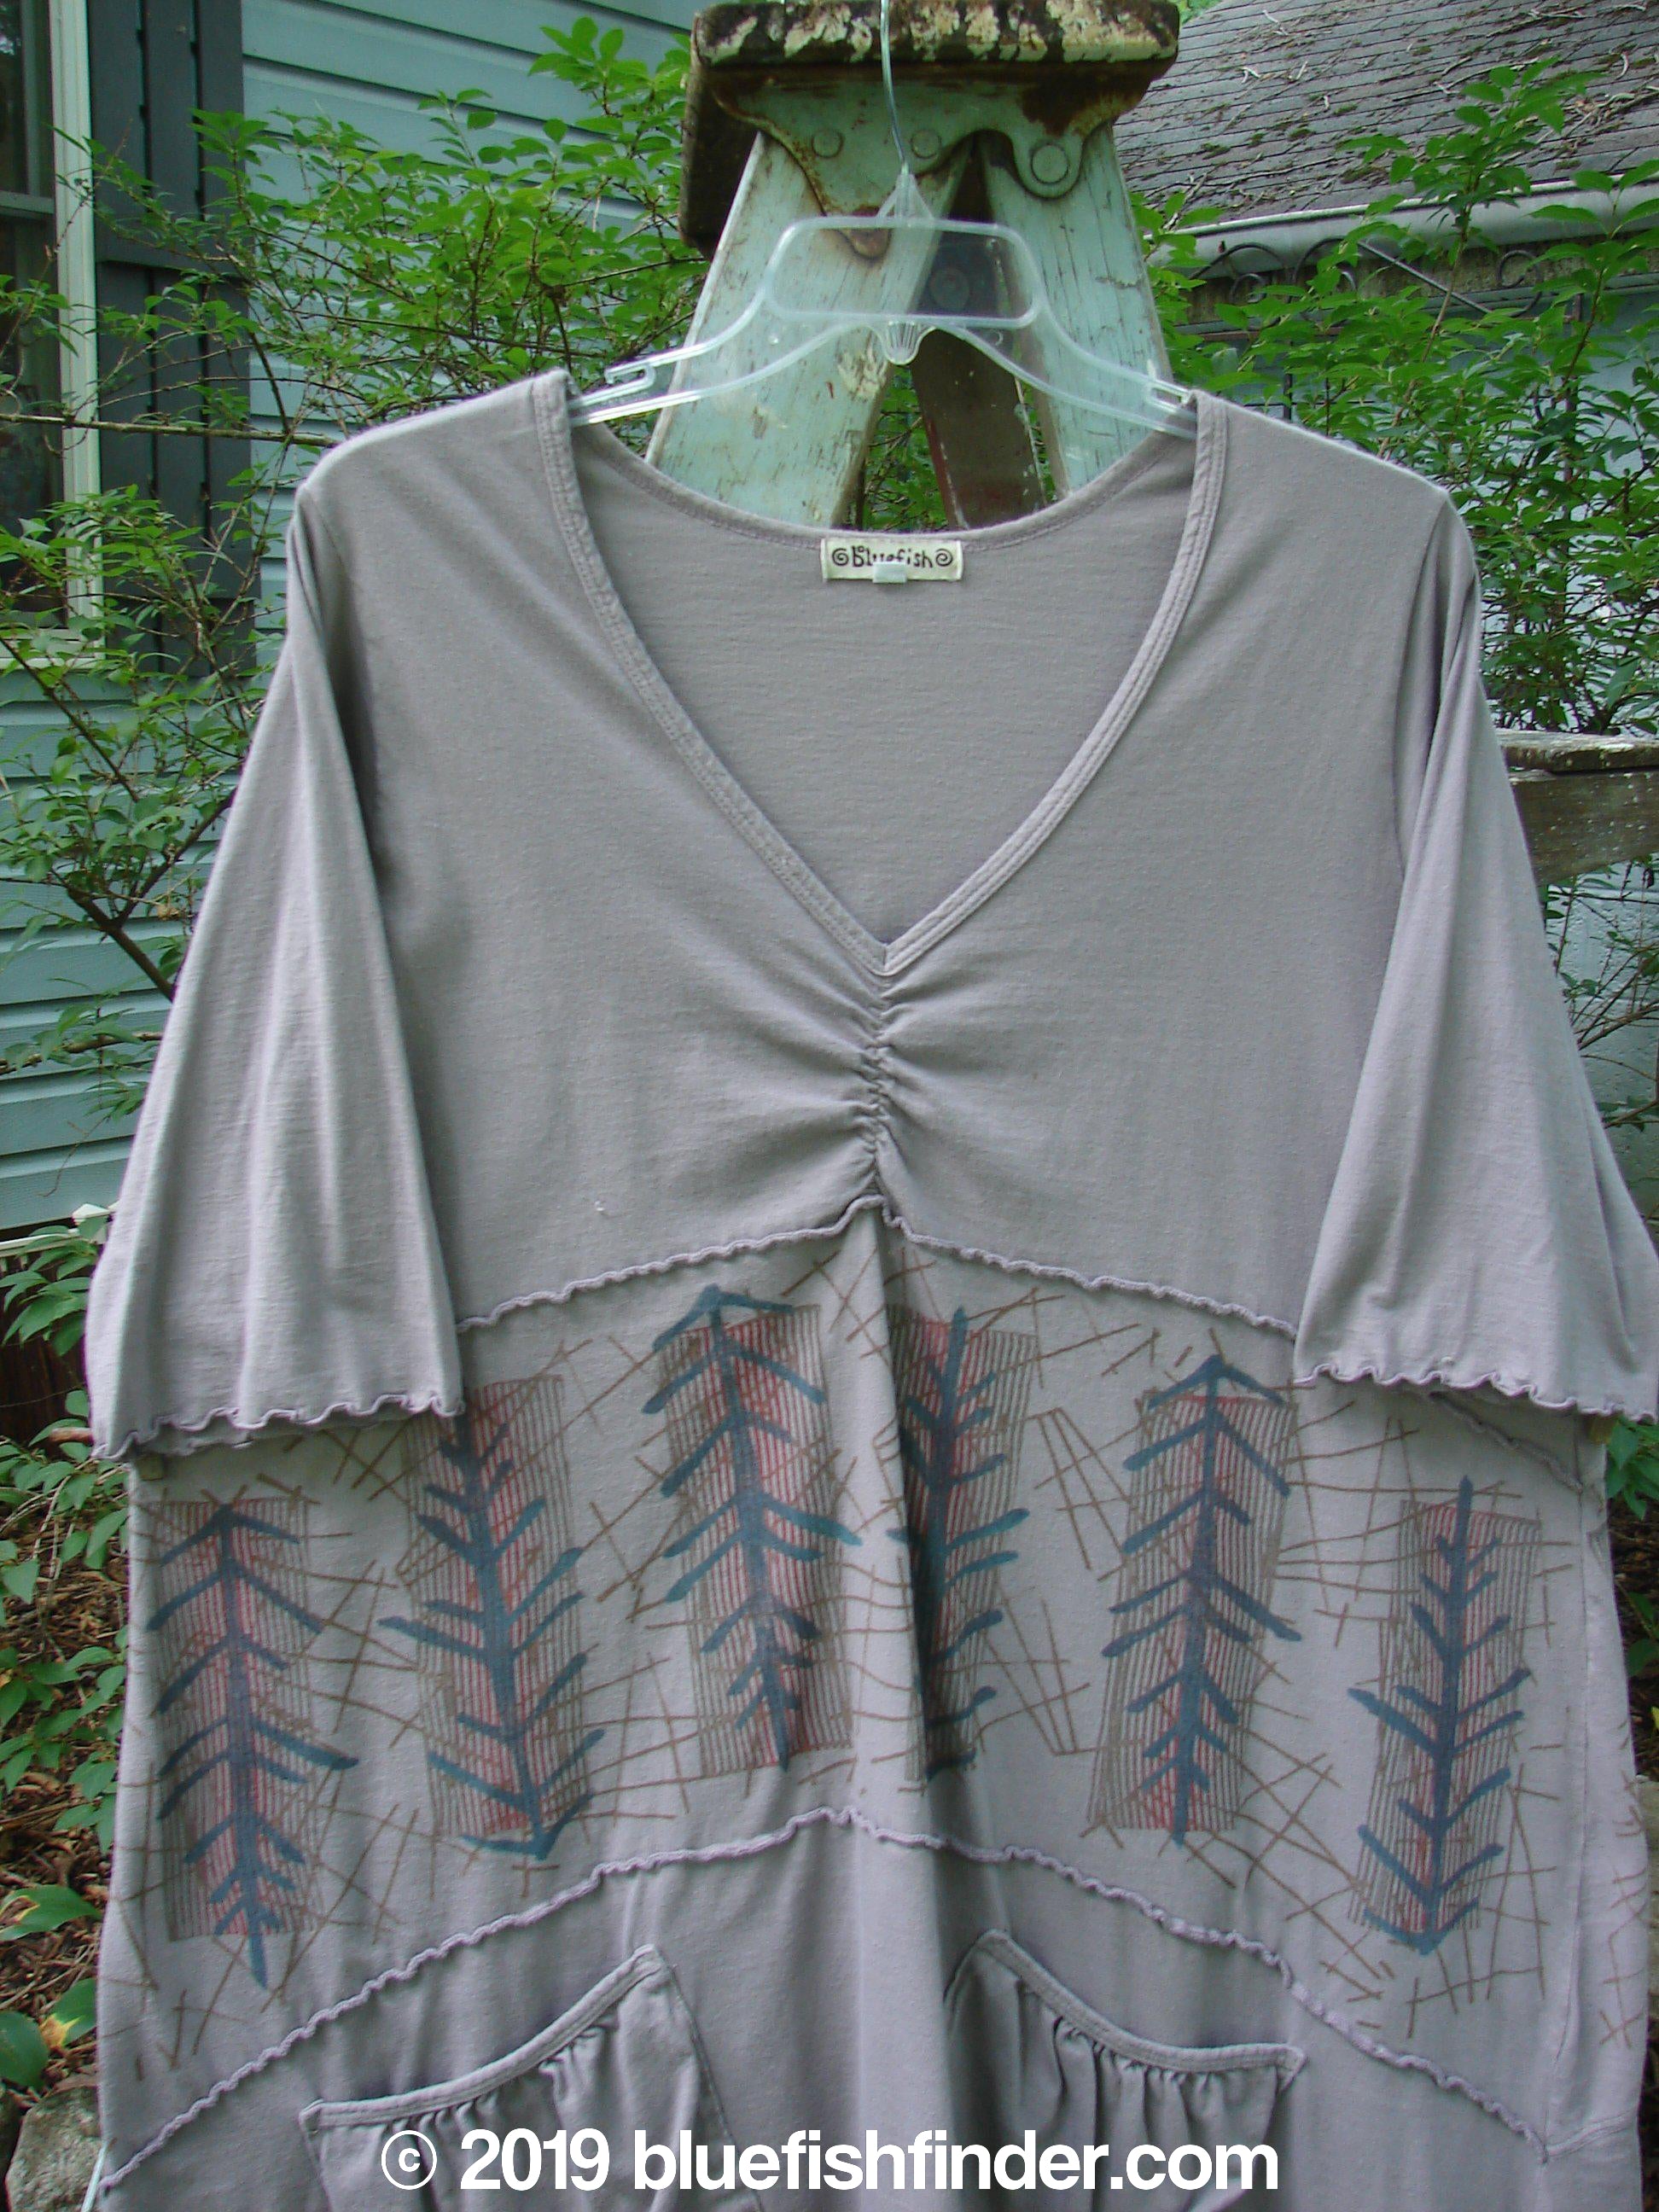 A Barclay Cotton Lycra Vertical Gather Drop Pocket Dress in Pine Forest Grey Stone. Features include a V-shaped neckline, varying hemline, oversized front pockets, and lovely pine forest paint.